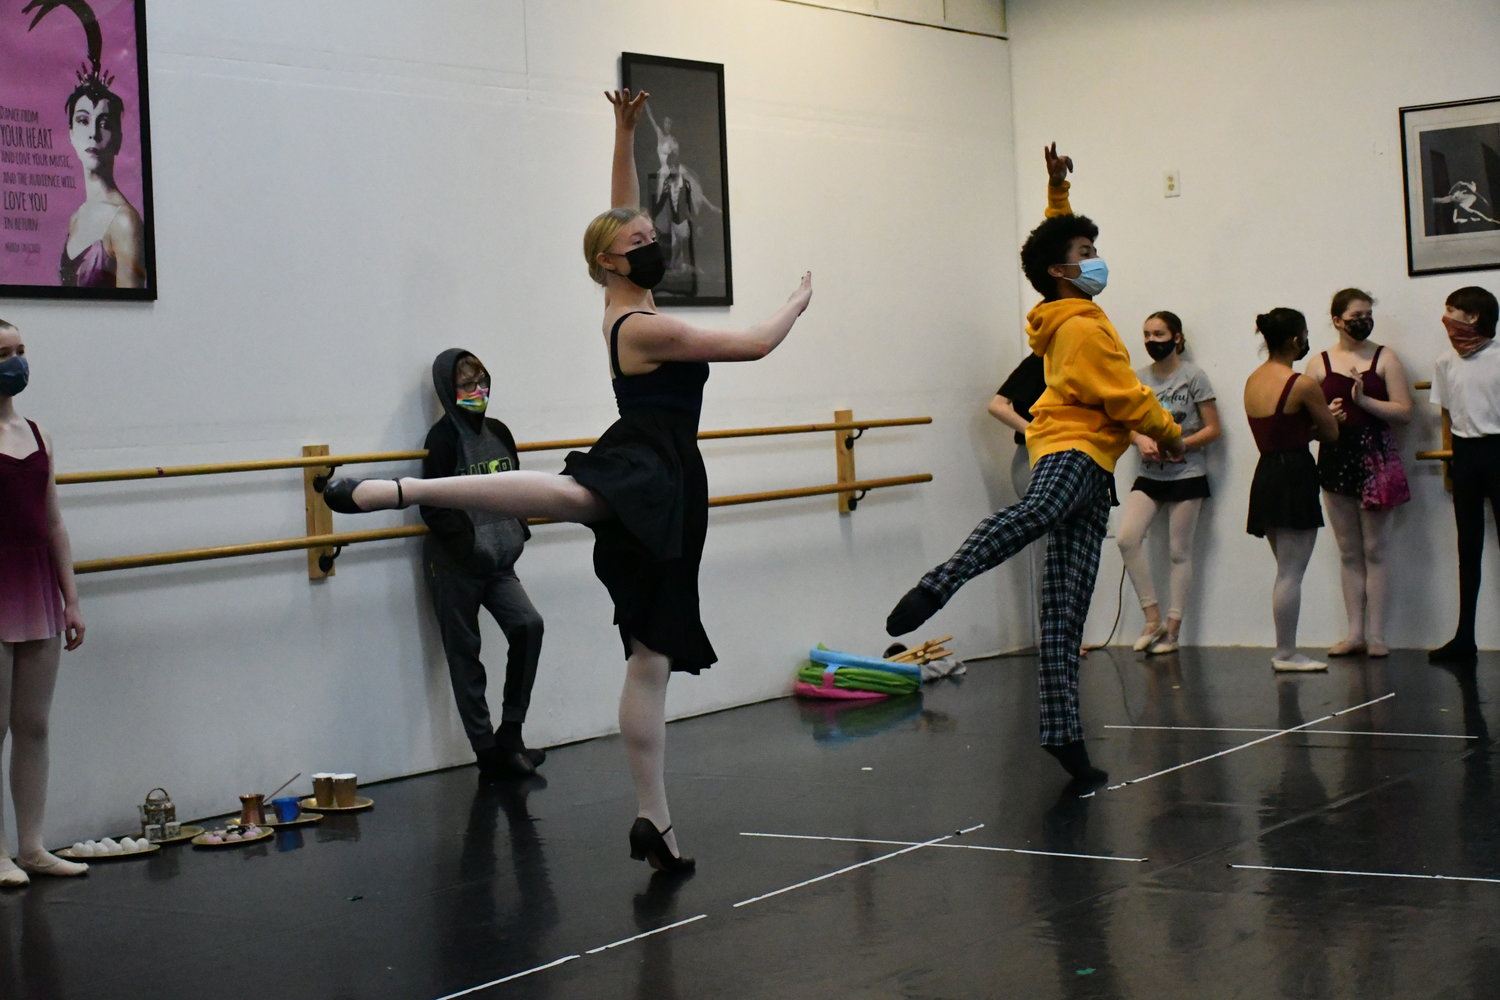 Centralia Ballet Academy performers practice for the upcoming production of The Nutcracker.